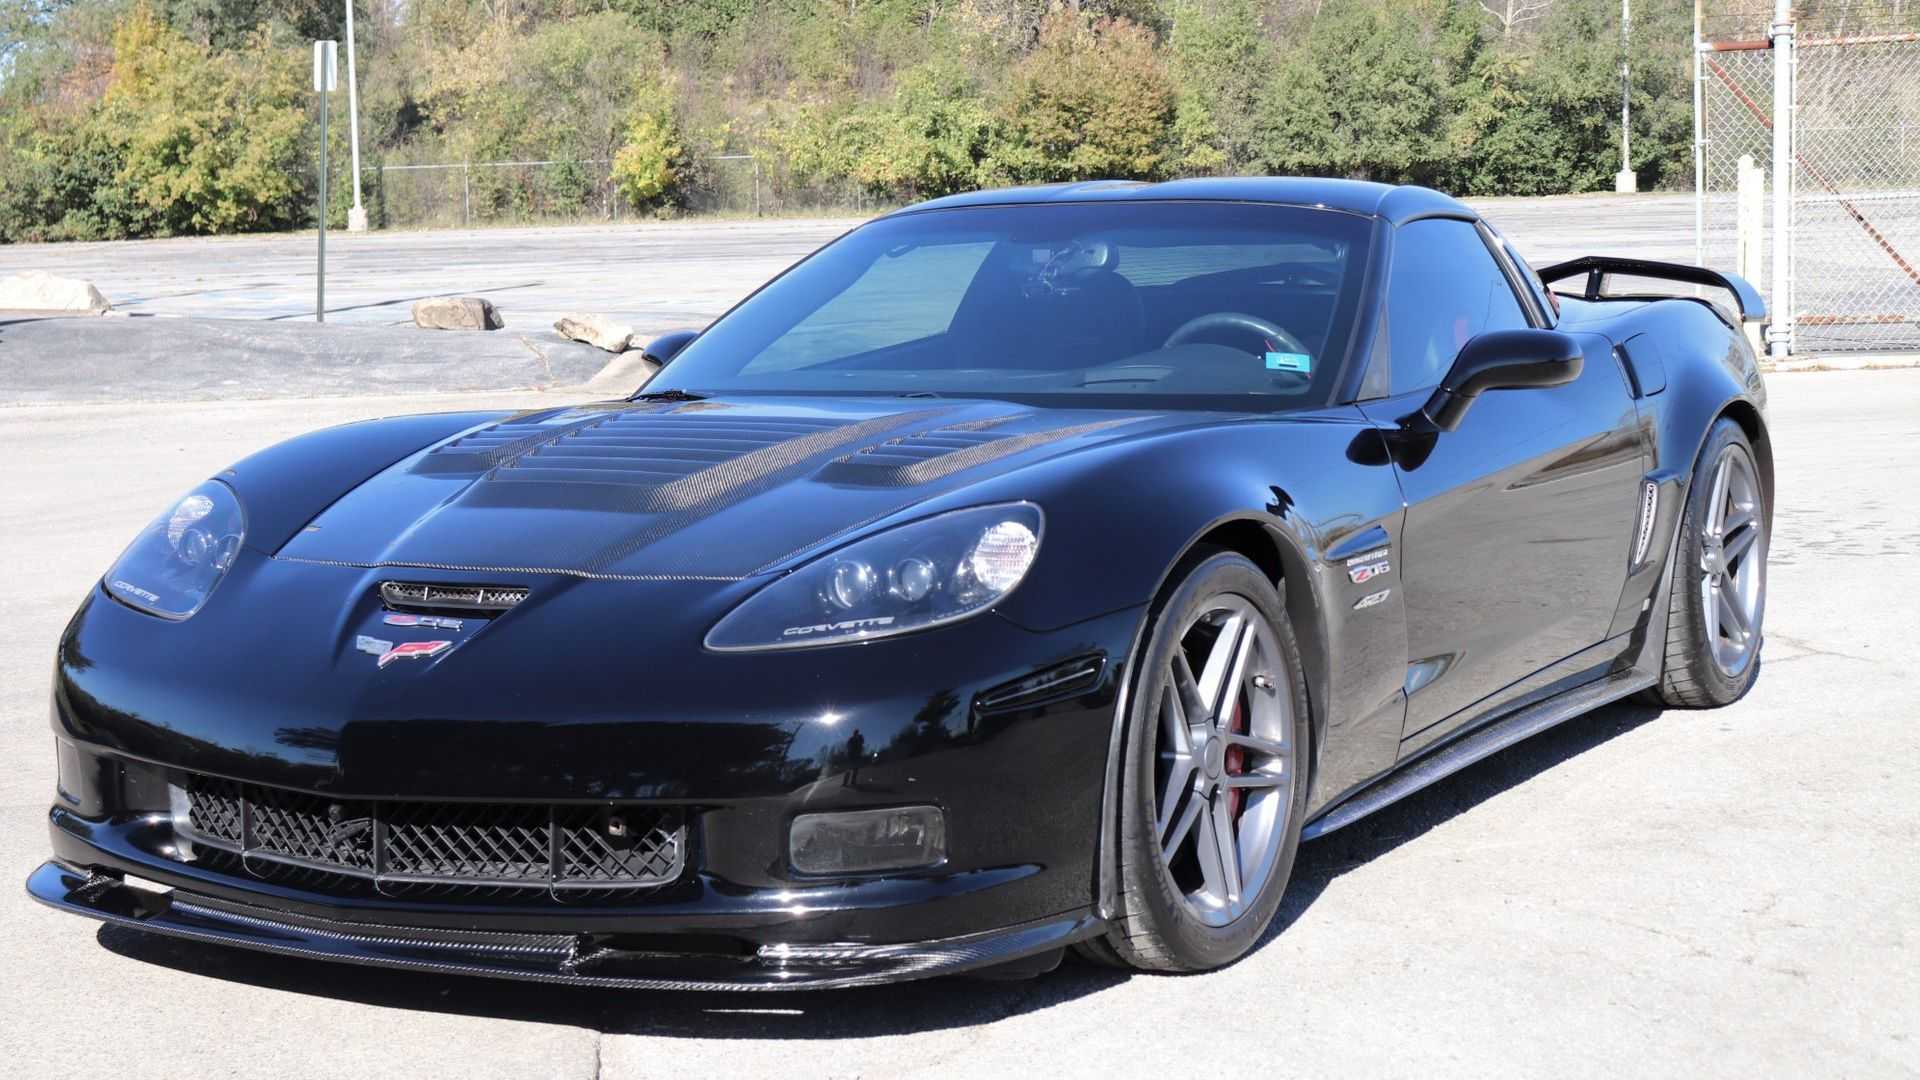 This black 2006 Chevrolet Corvette C6 Z06 is powered by a 610-horsepower, 4...